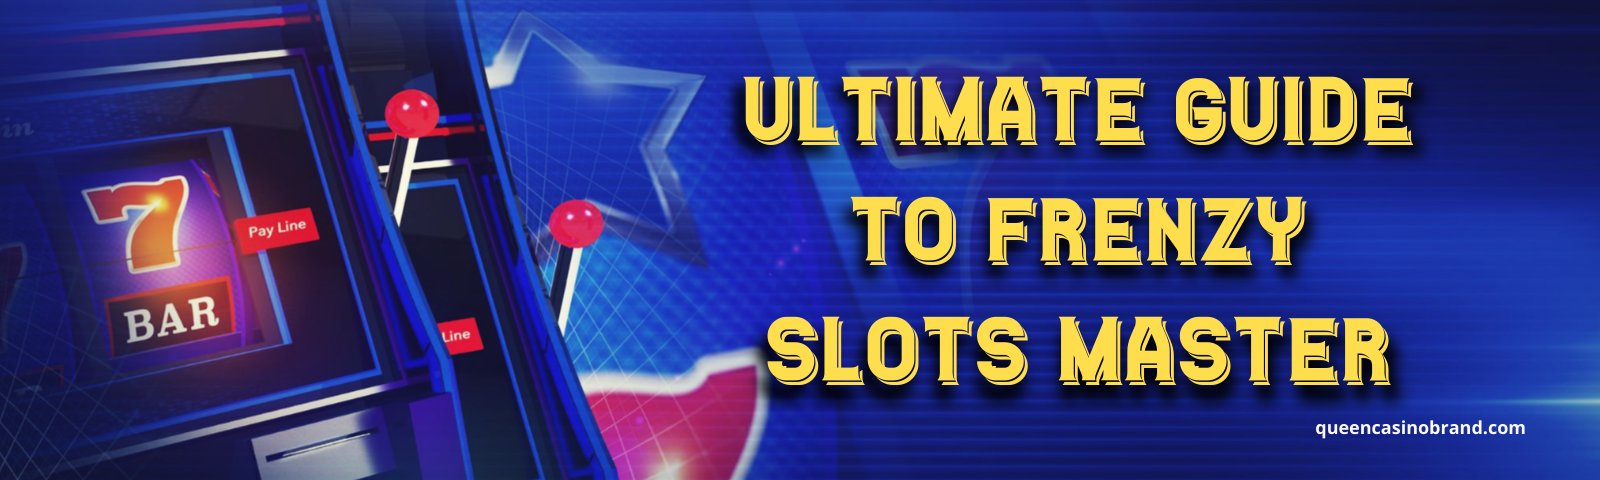 Ultimate Guide to Frenzy Slots Master